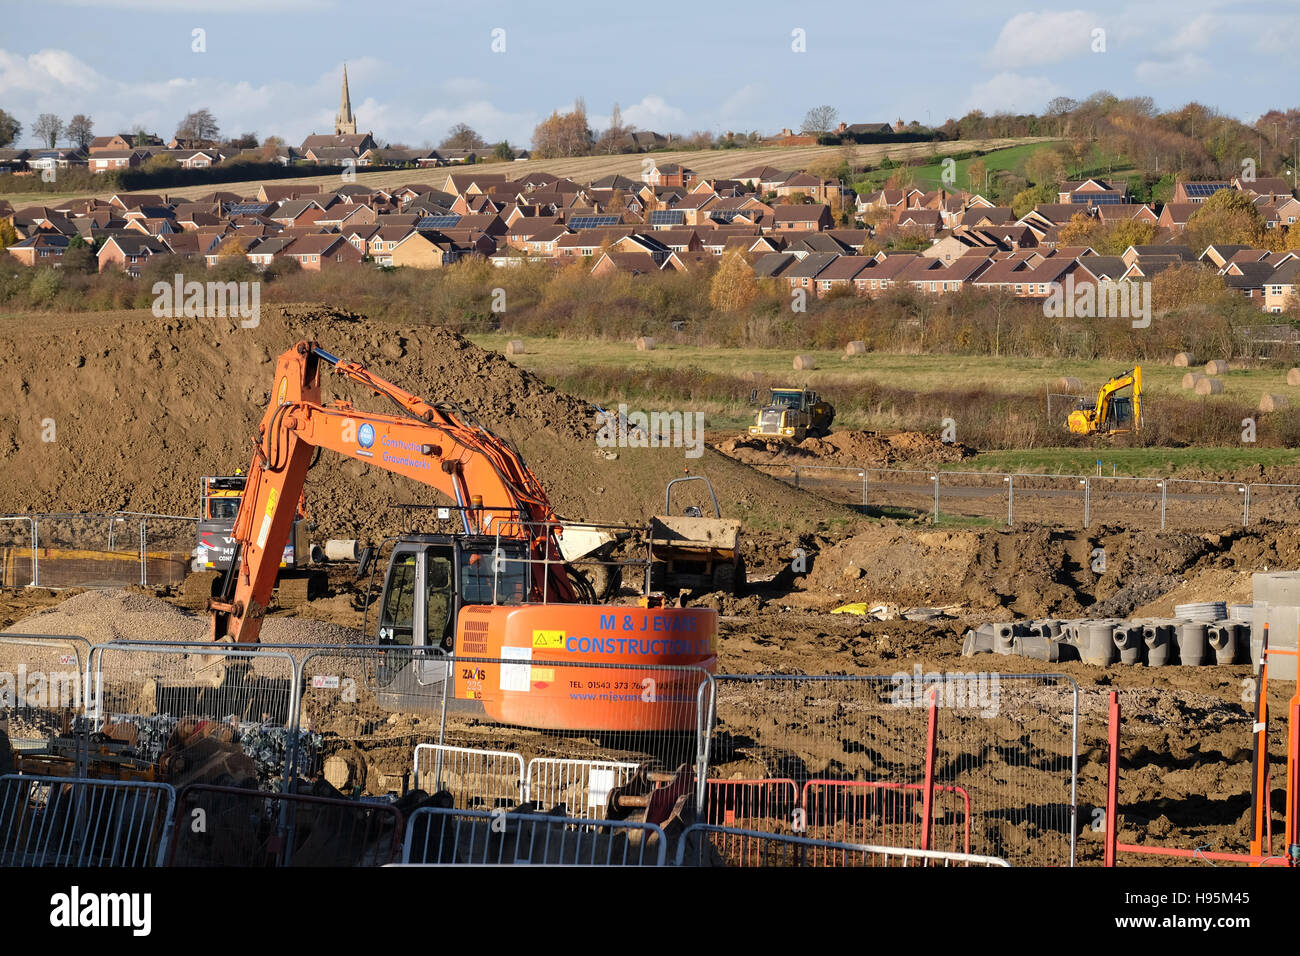 Heavy machinery being used to level the ground for house building, Grantham Lincs, England, UK Stock Photo